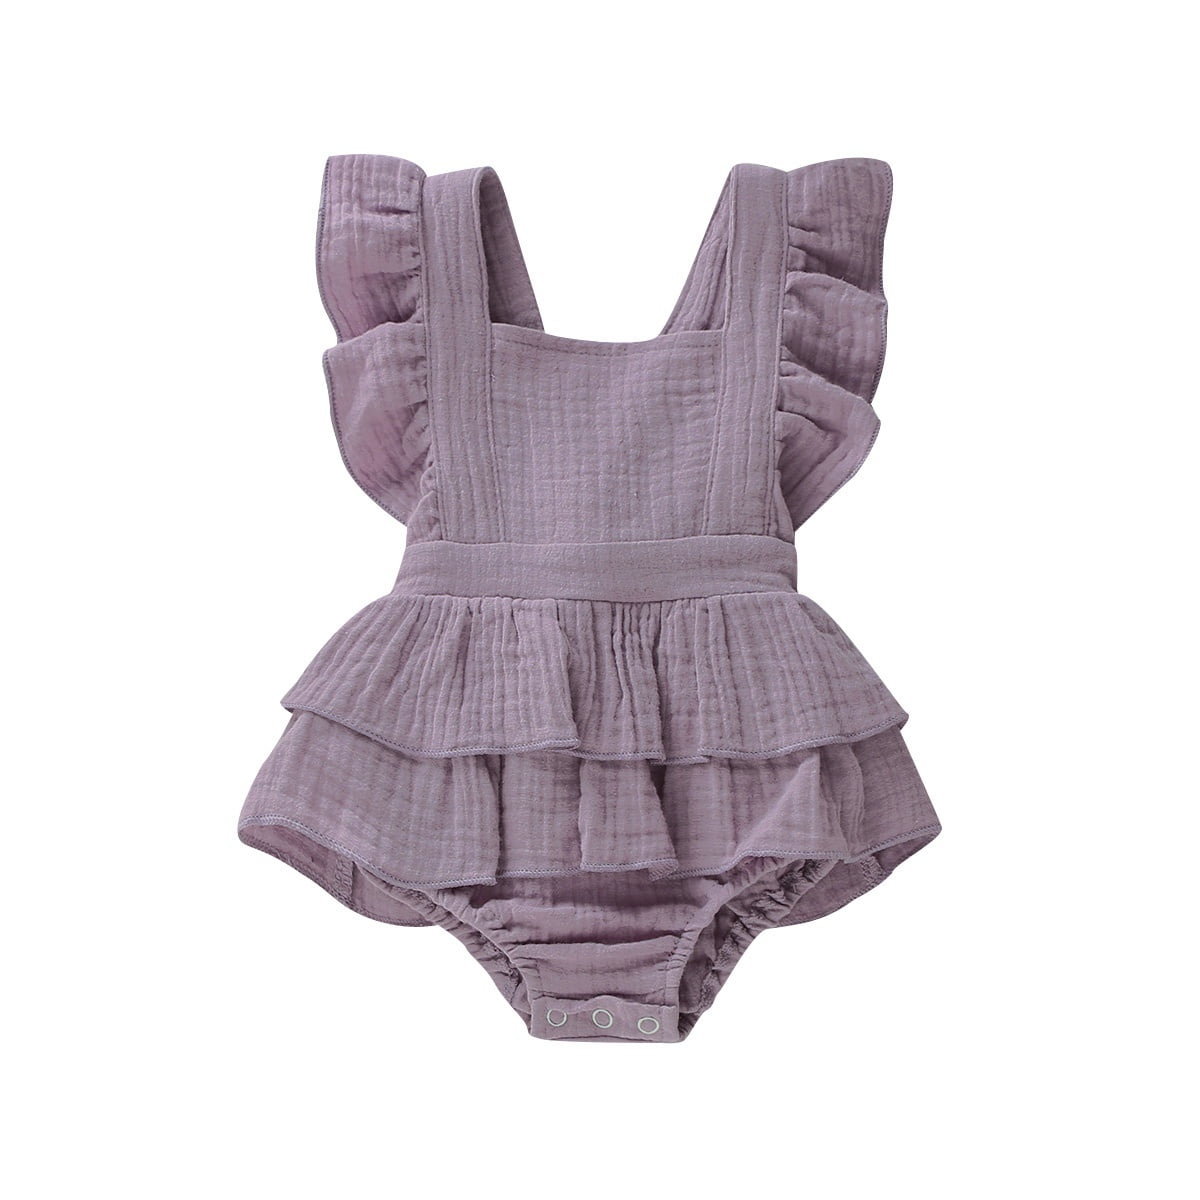 Toddler Infant Kids Baby Girls Clothes ange combinaison body Sunsuit Tenues 